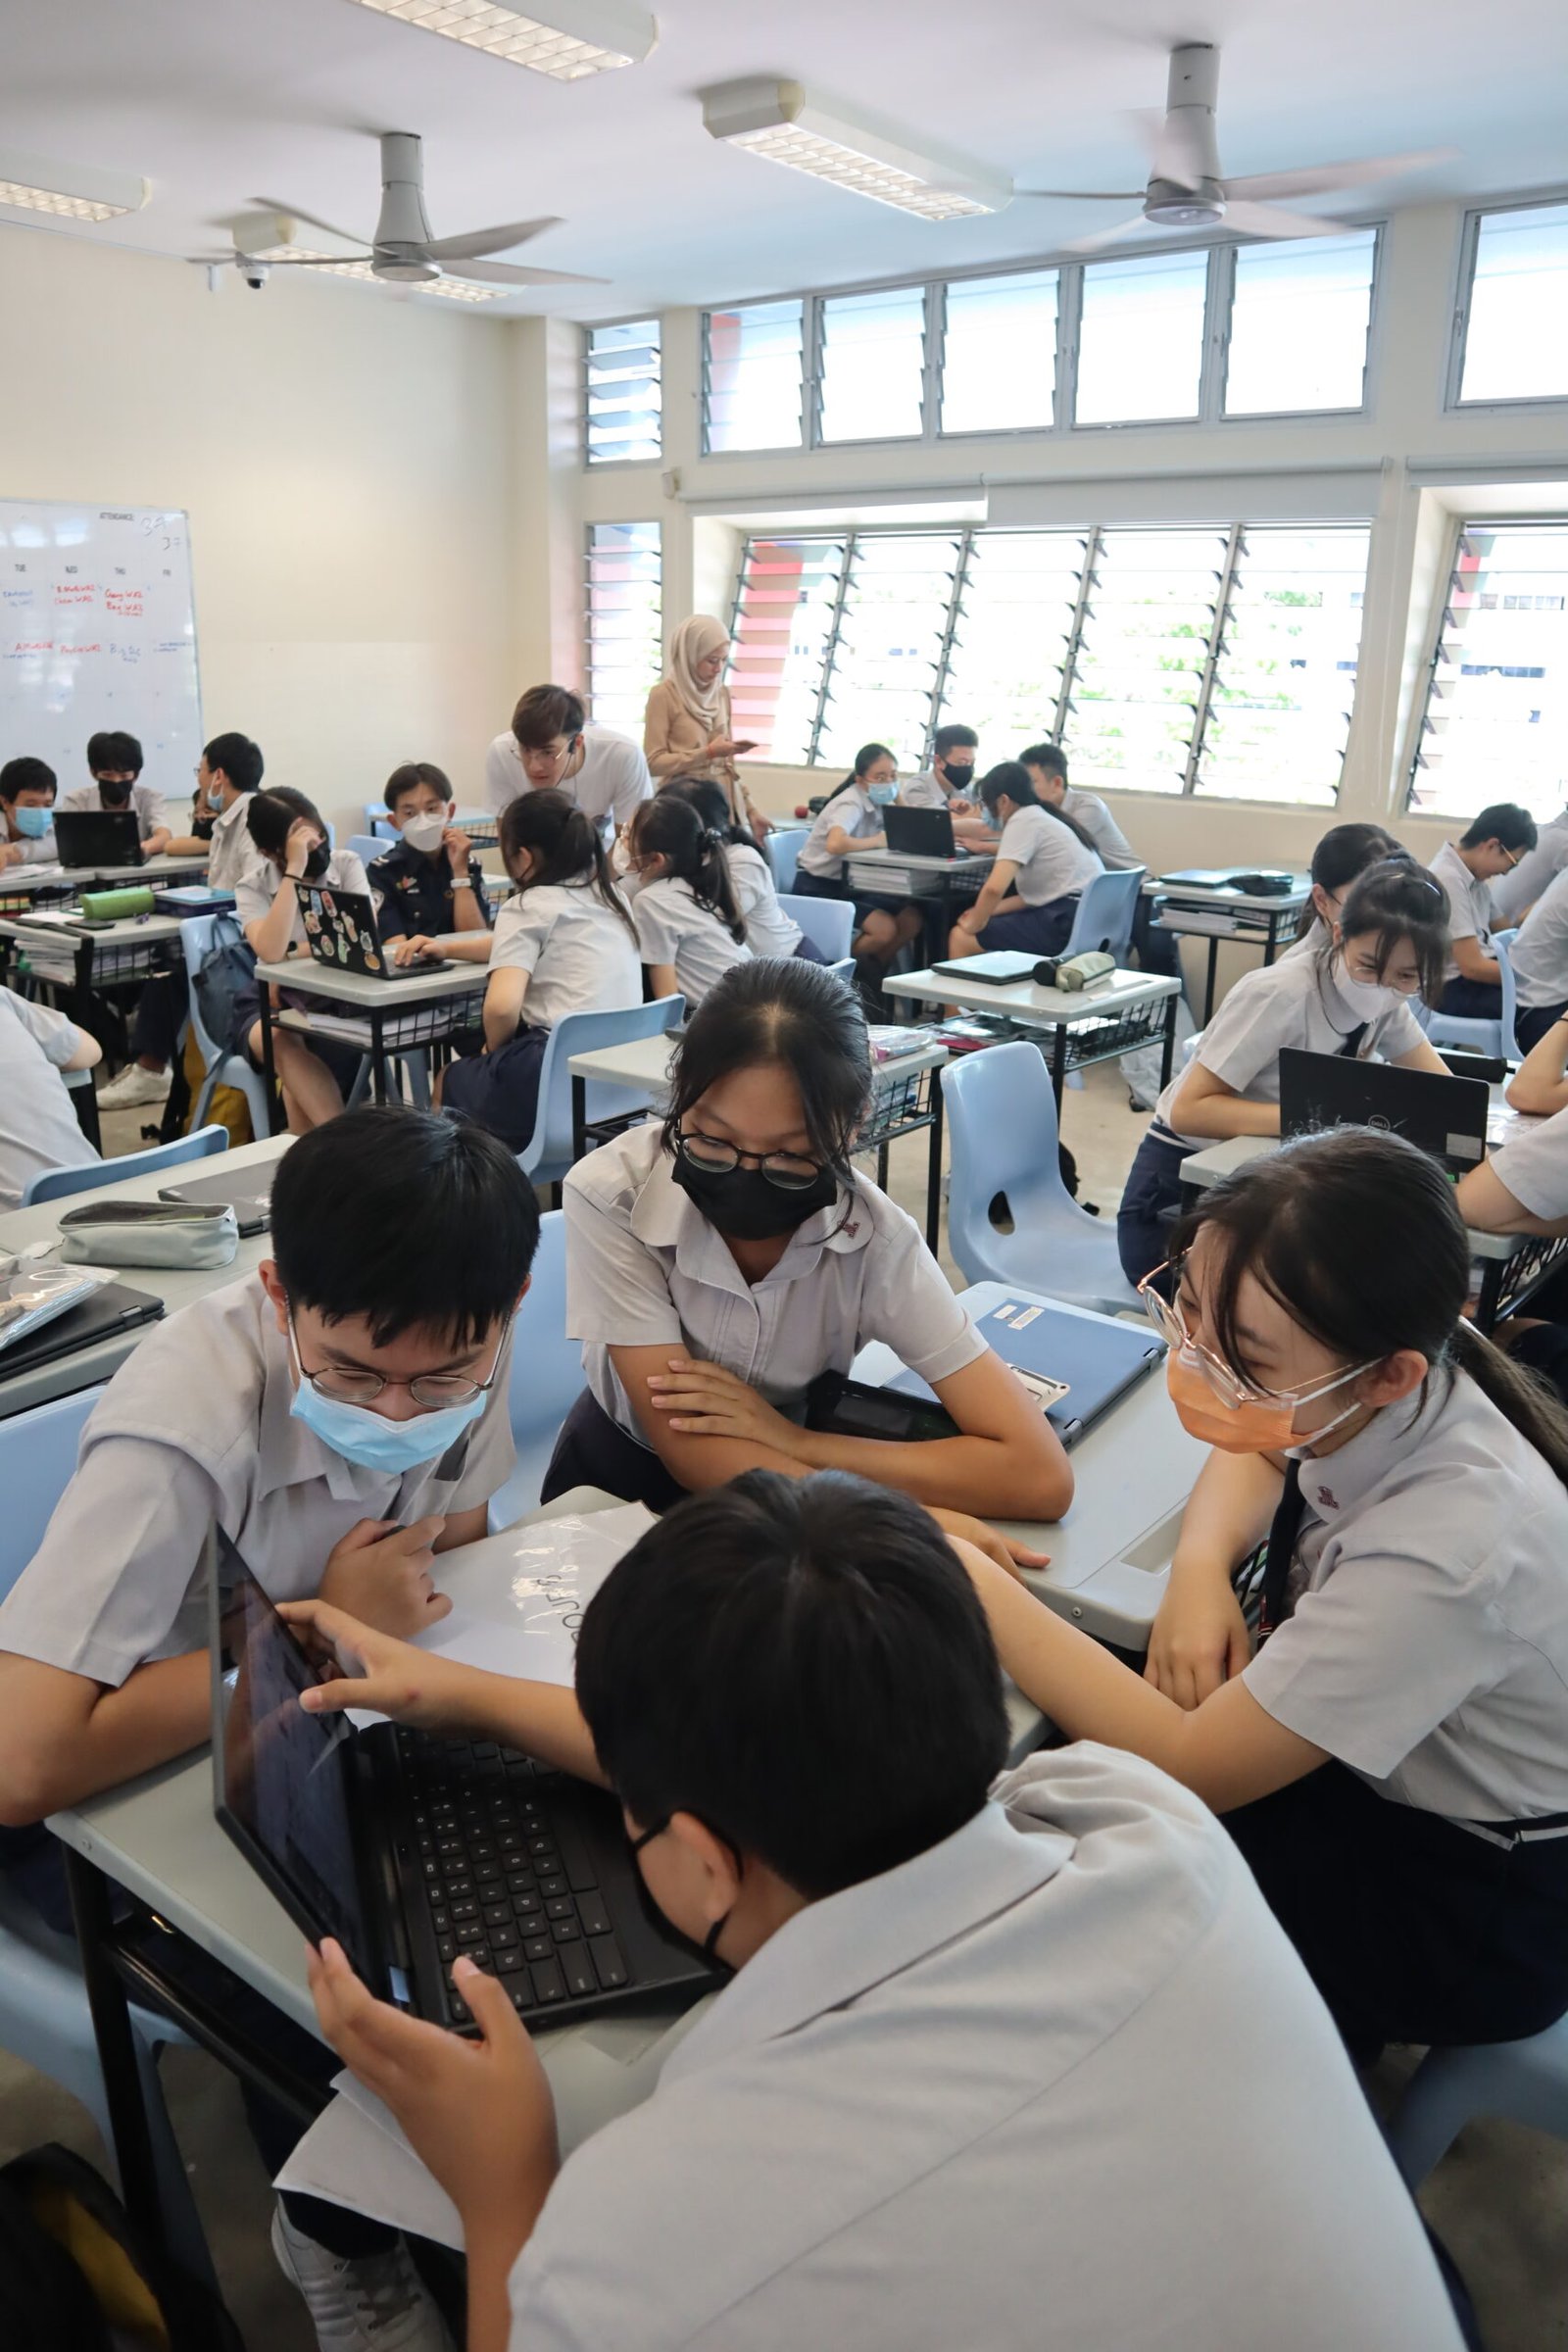 Student's actively learning in digital learning experiences